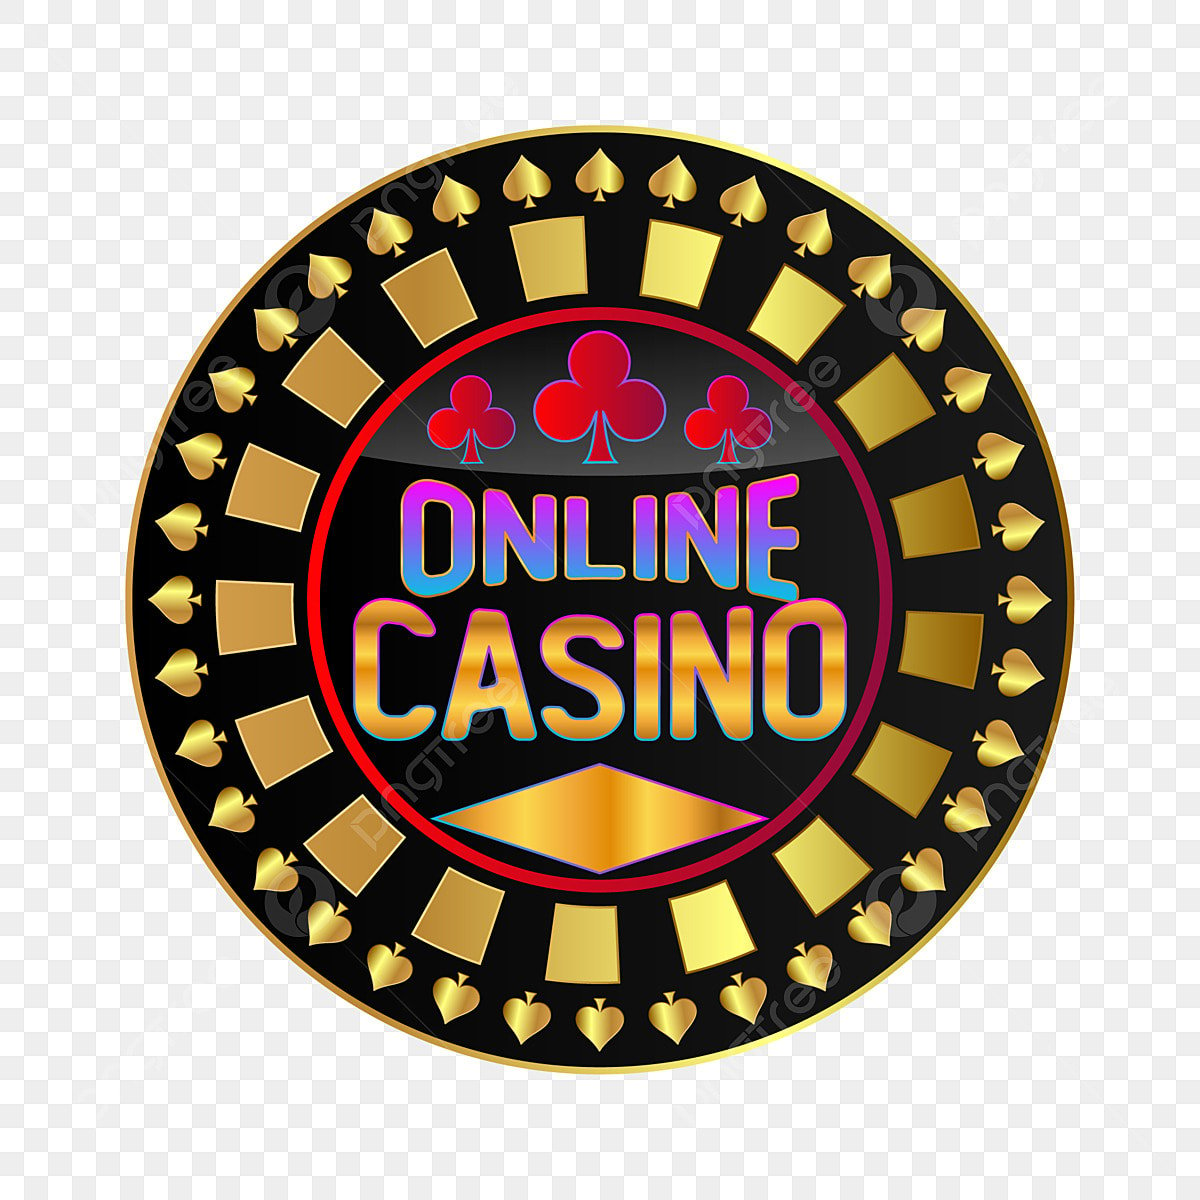 Explaining the RTP ( Return to Player ) algorithm in 747.live casino login Online Casino in simple terms.